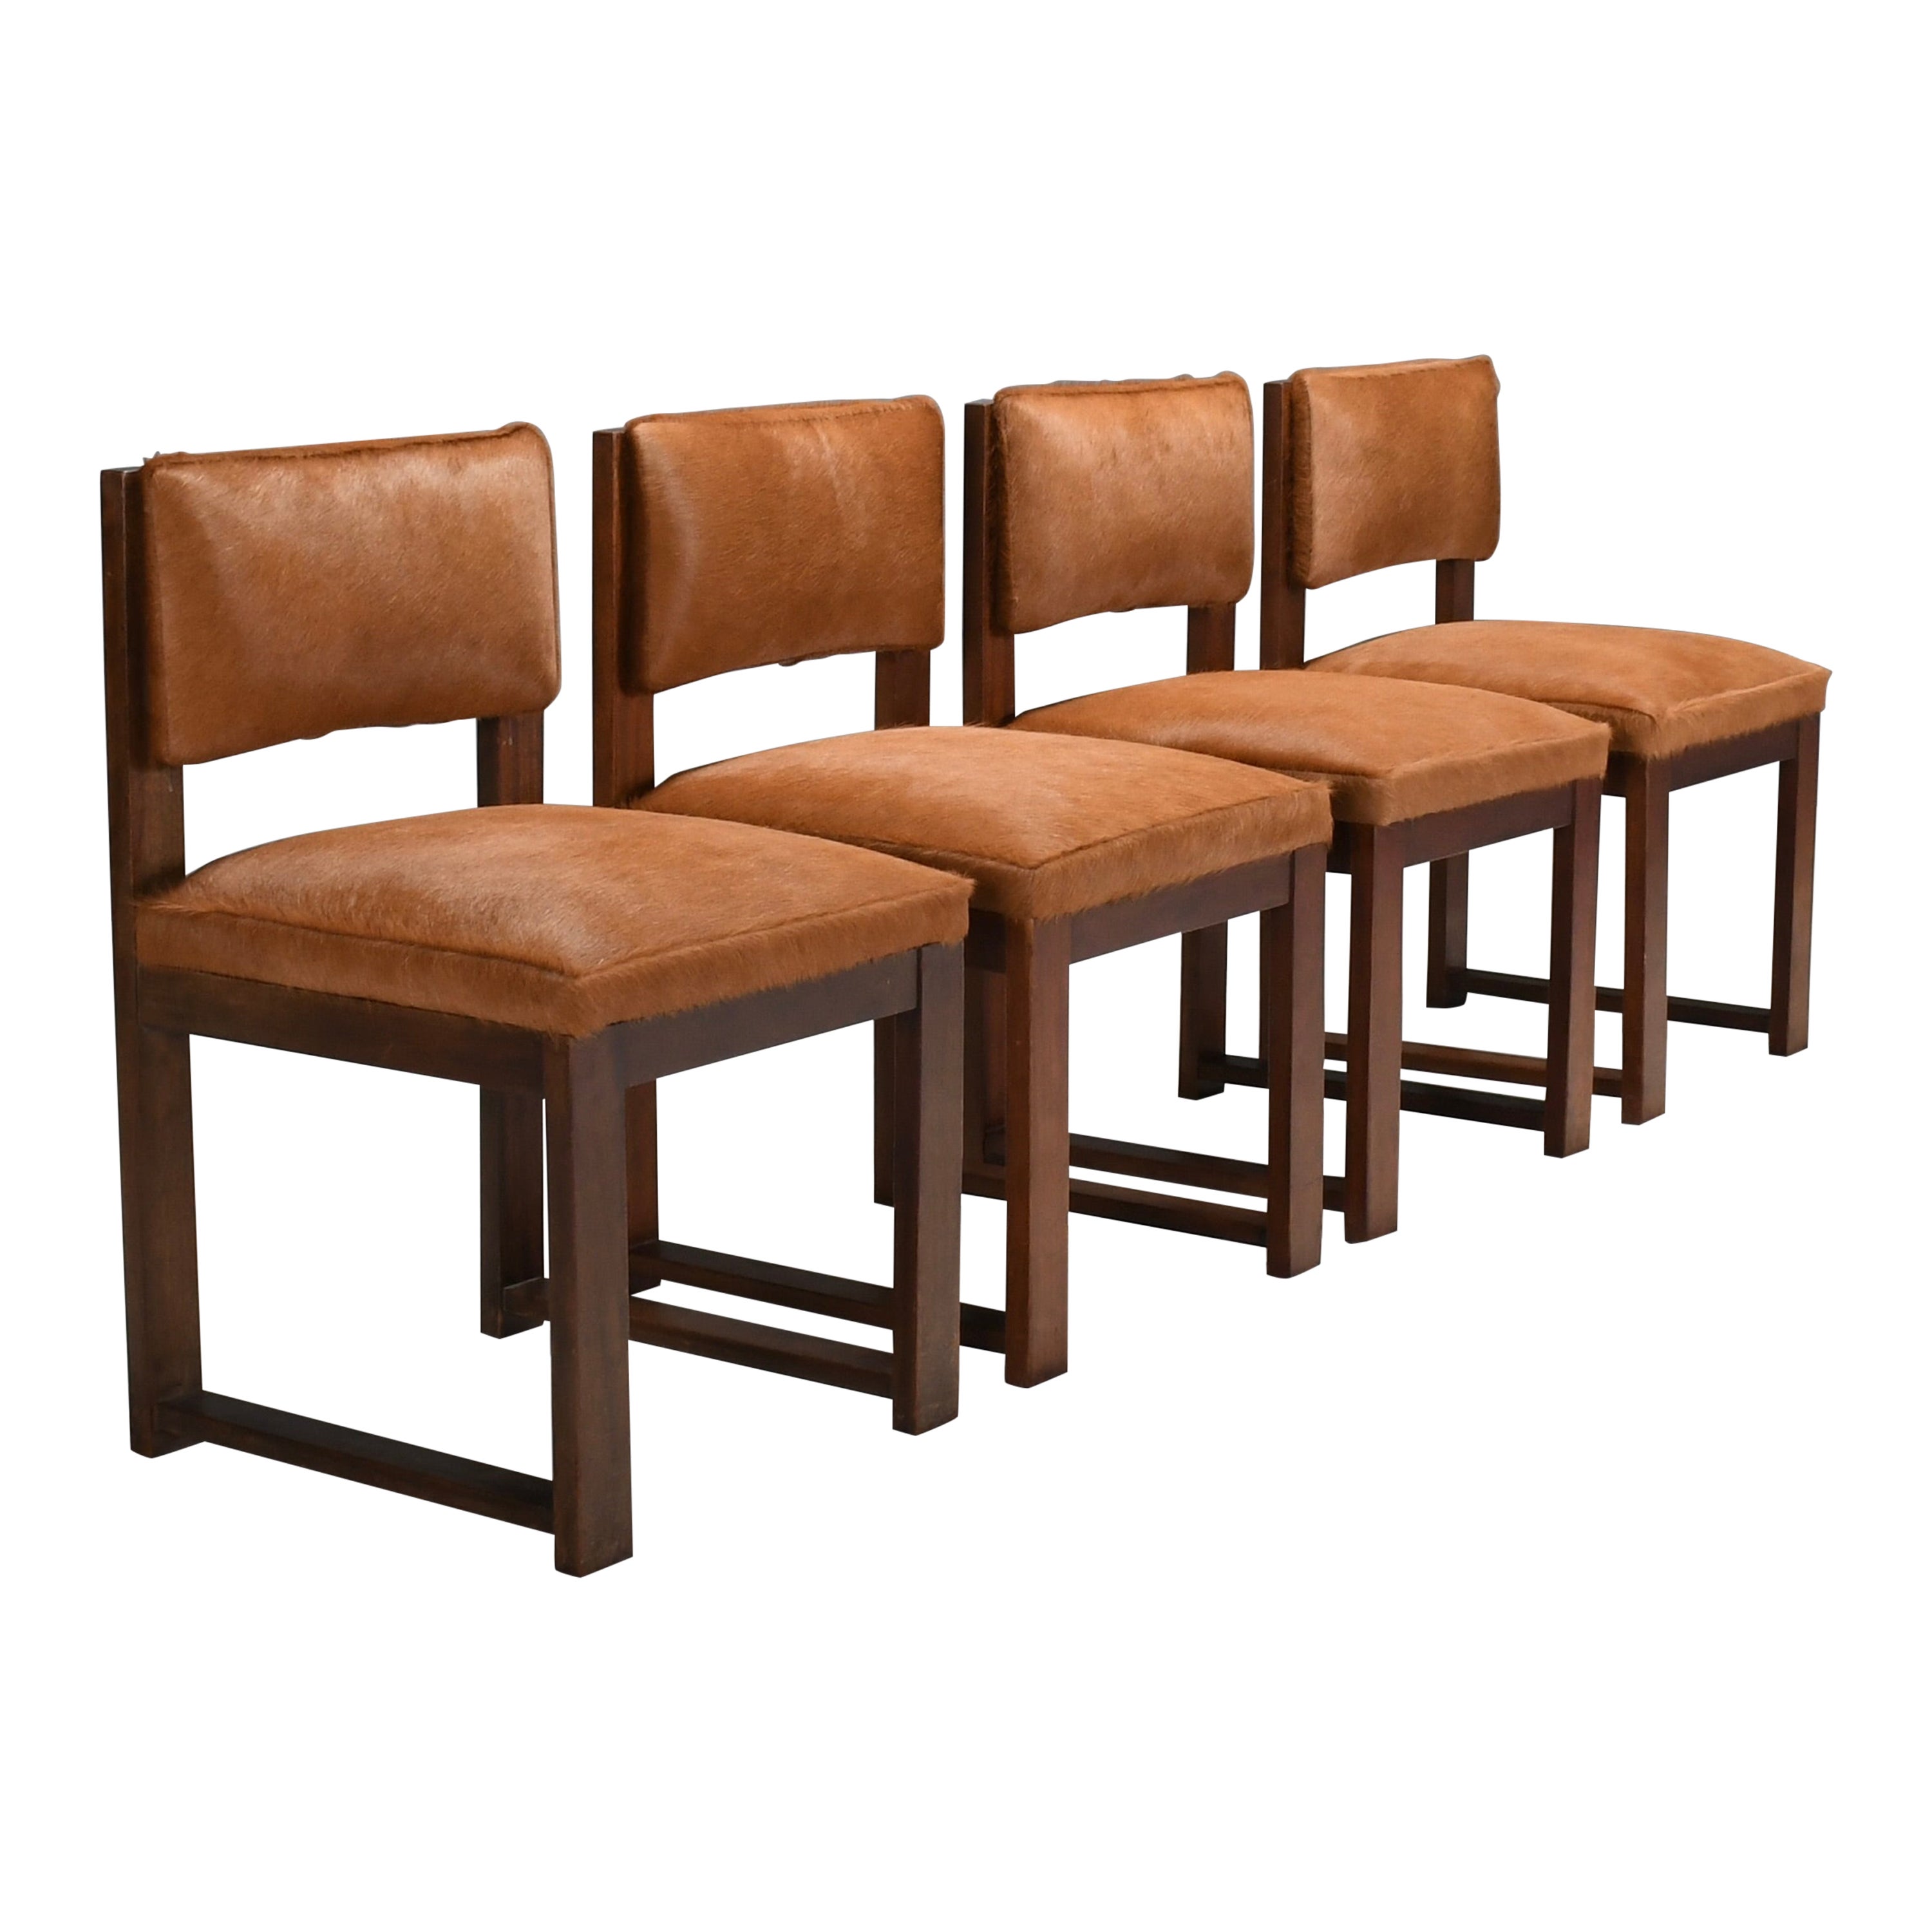 Set of 4 Minimalist Art Deco Dining Chairs in Cowhide, Netherlands, 1940s  For Sale